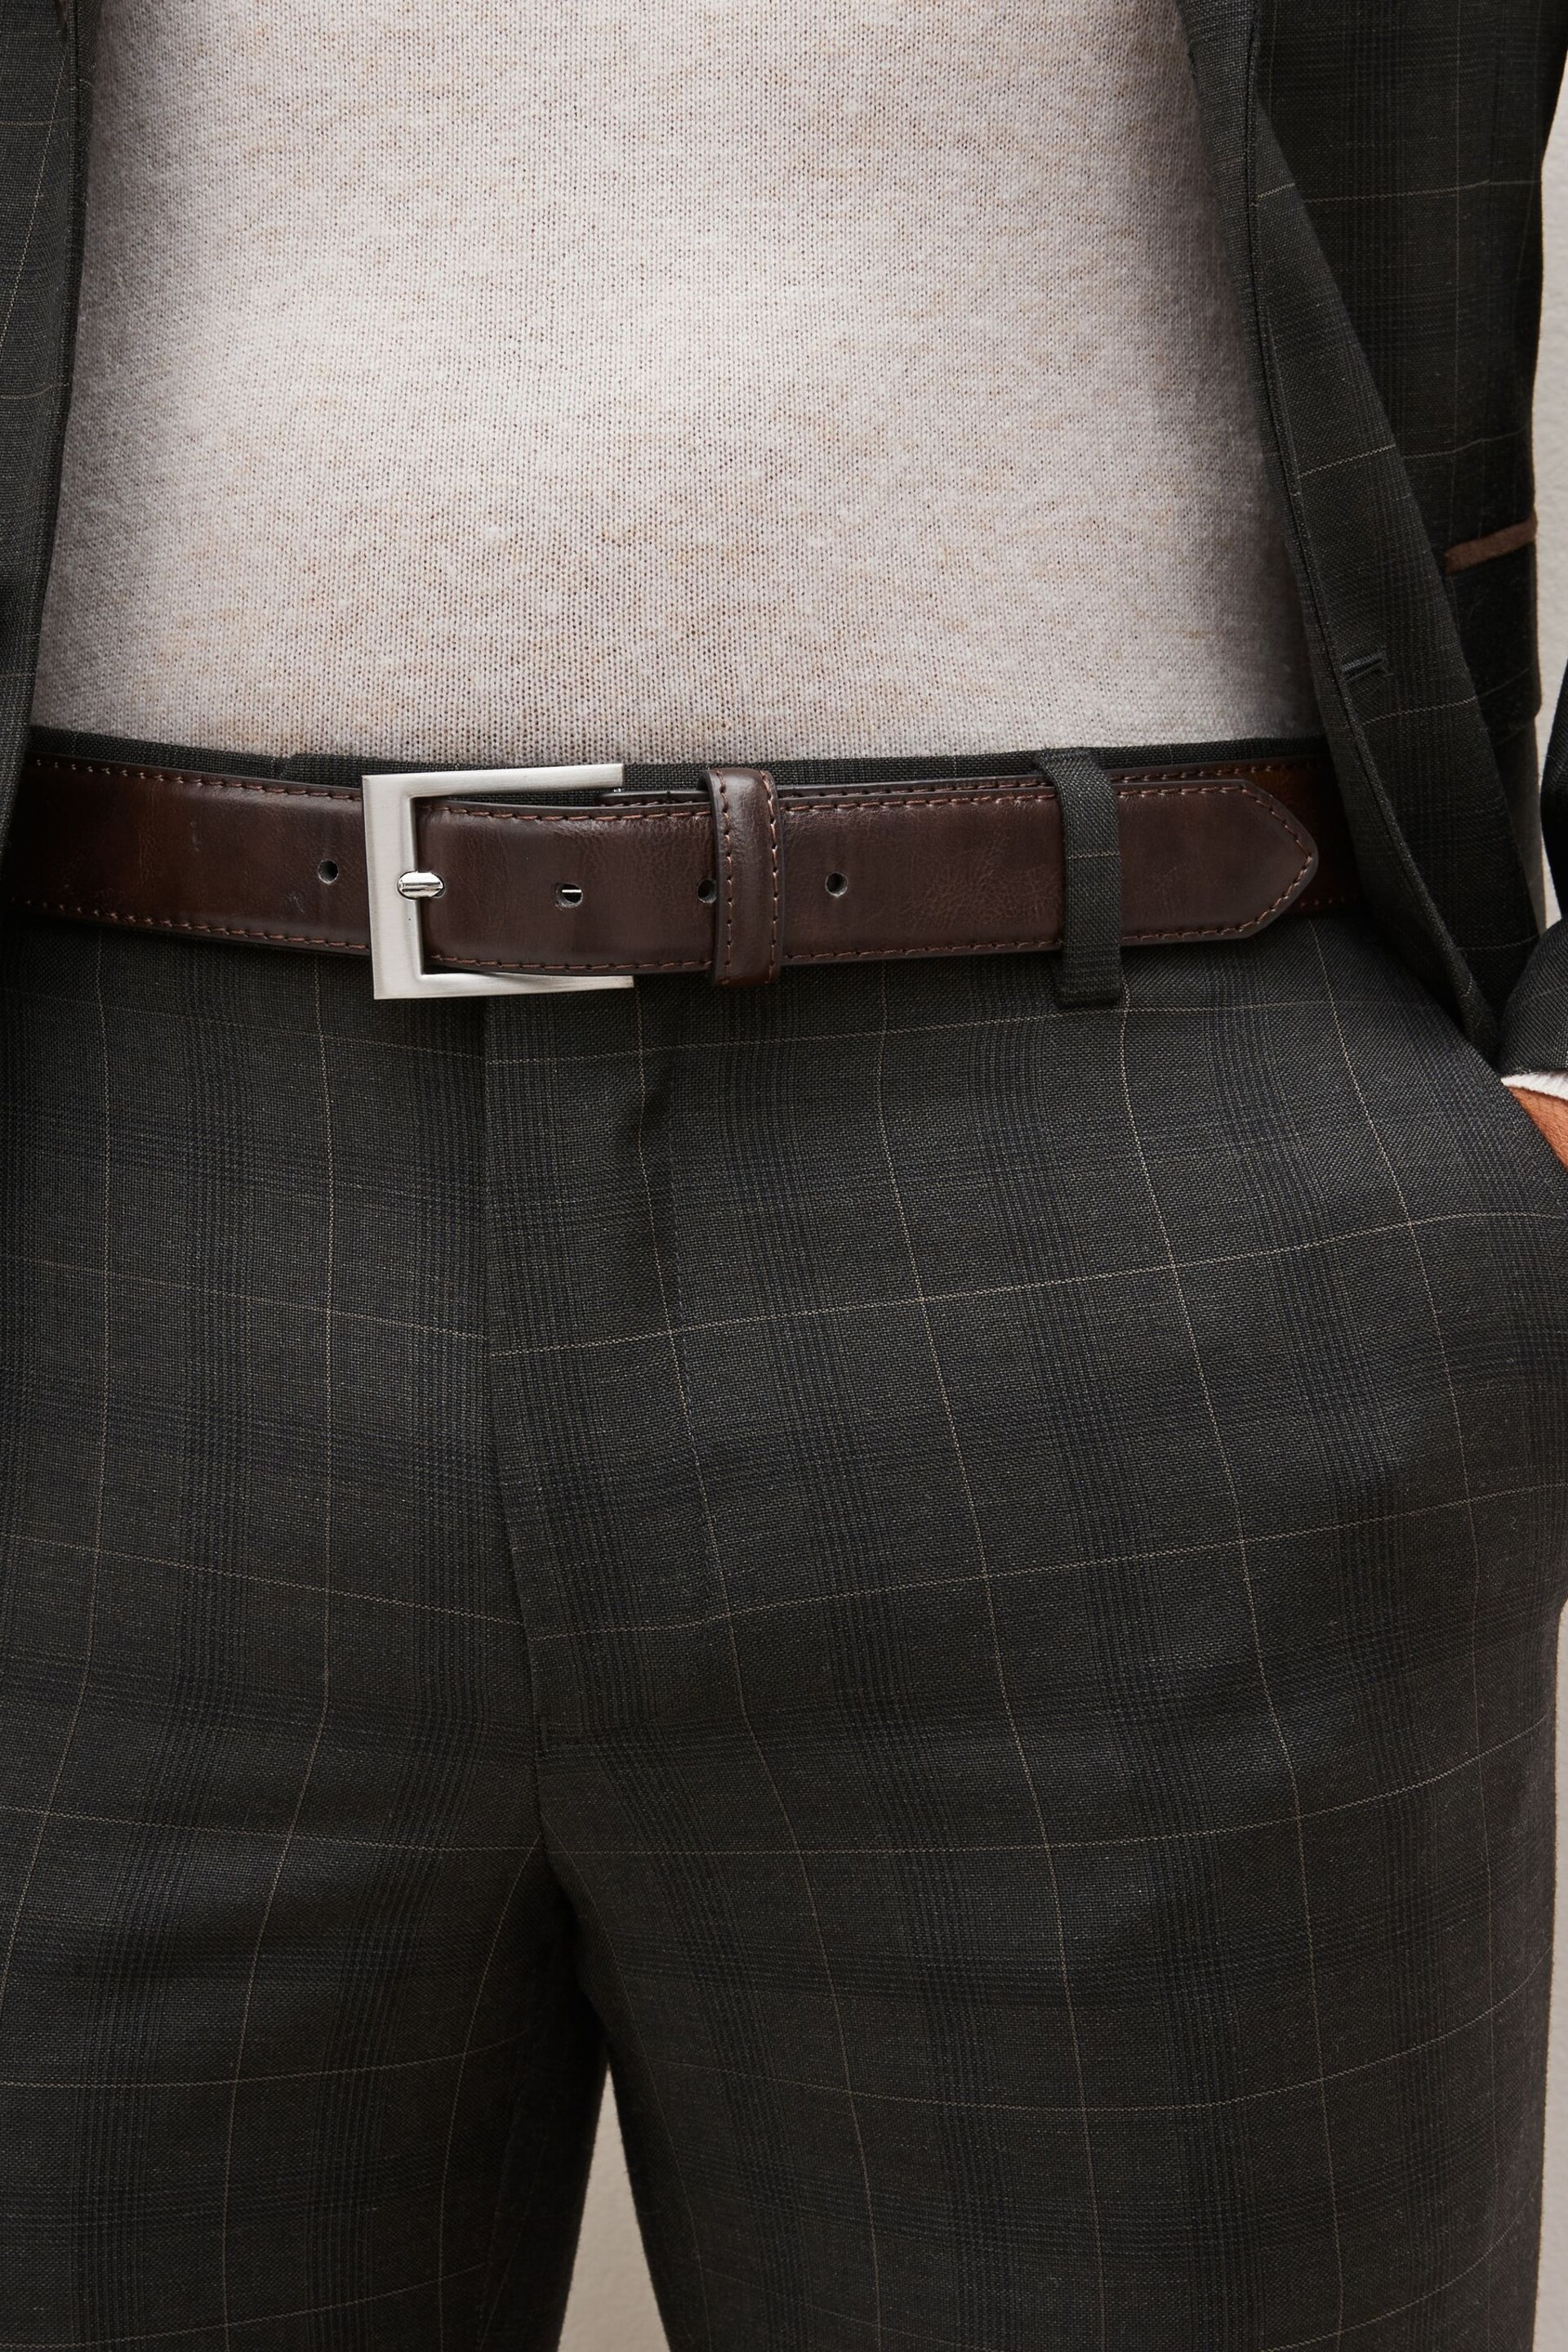 Brown Faux Leather Belt - Image 1 of 2